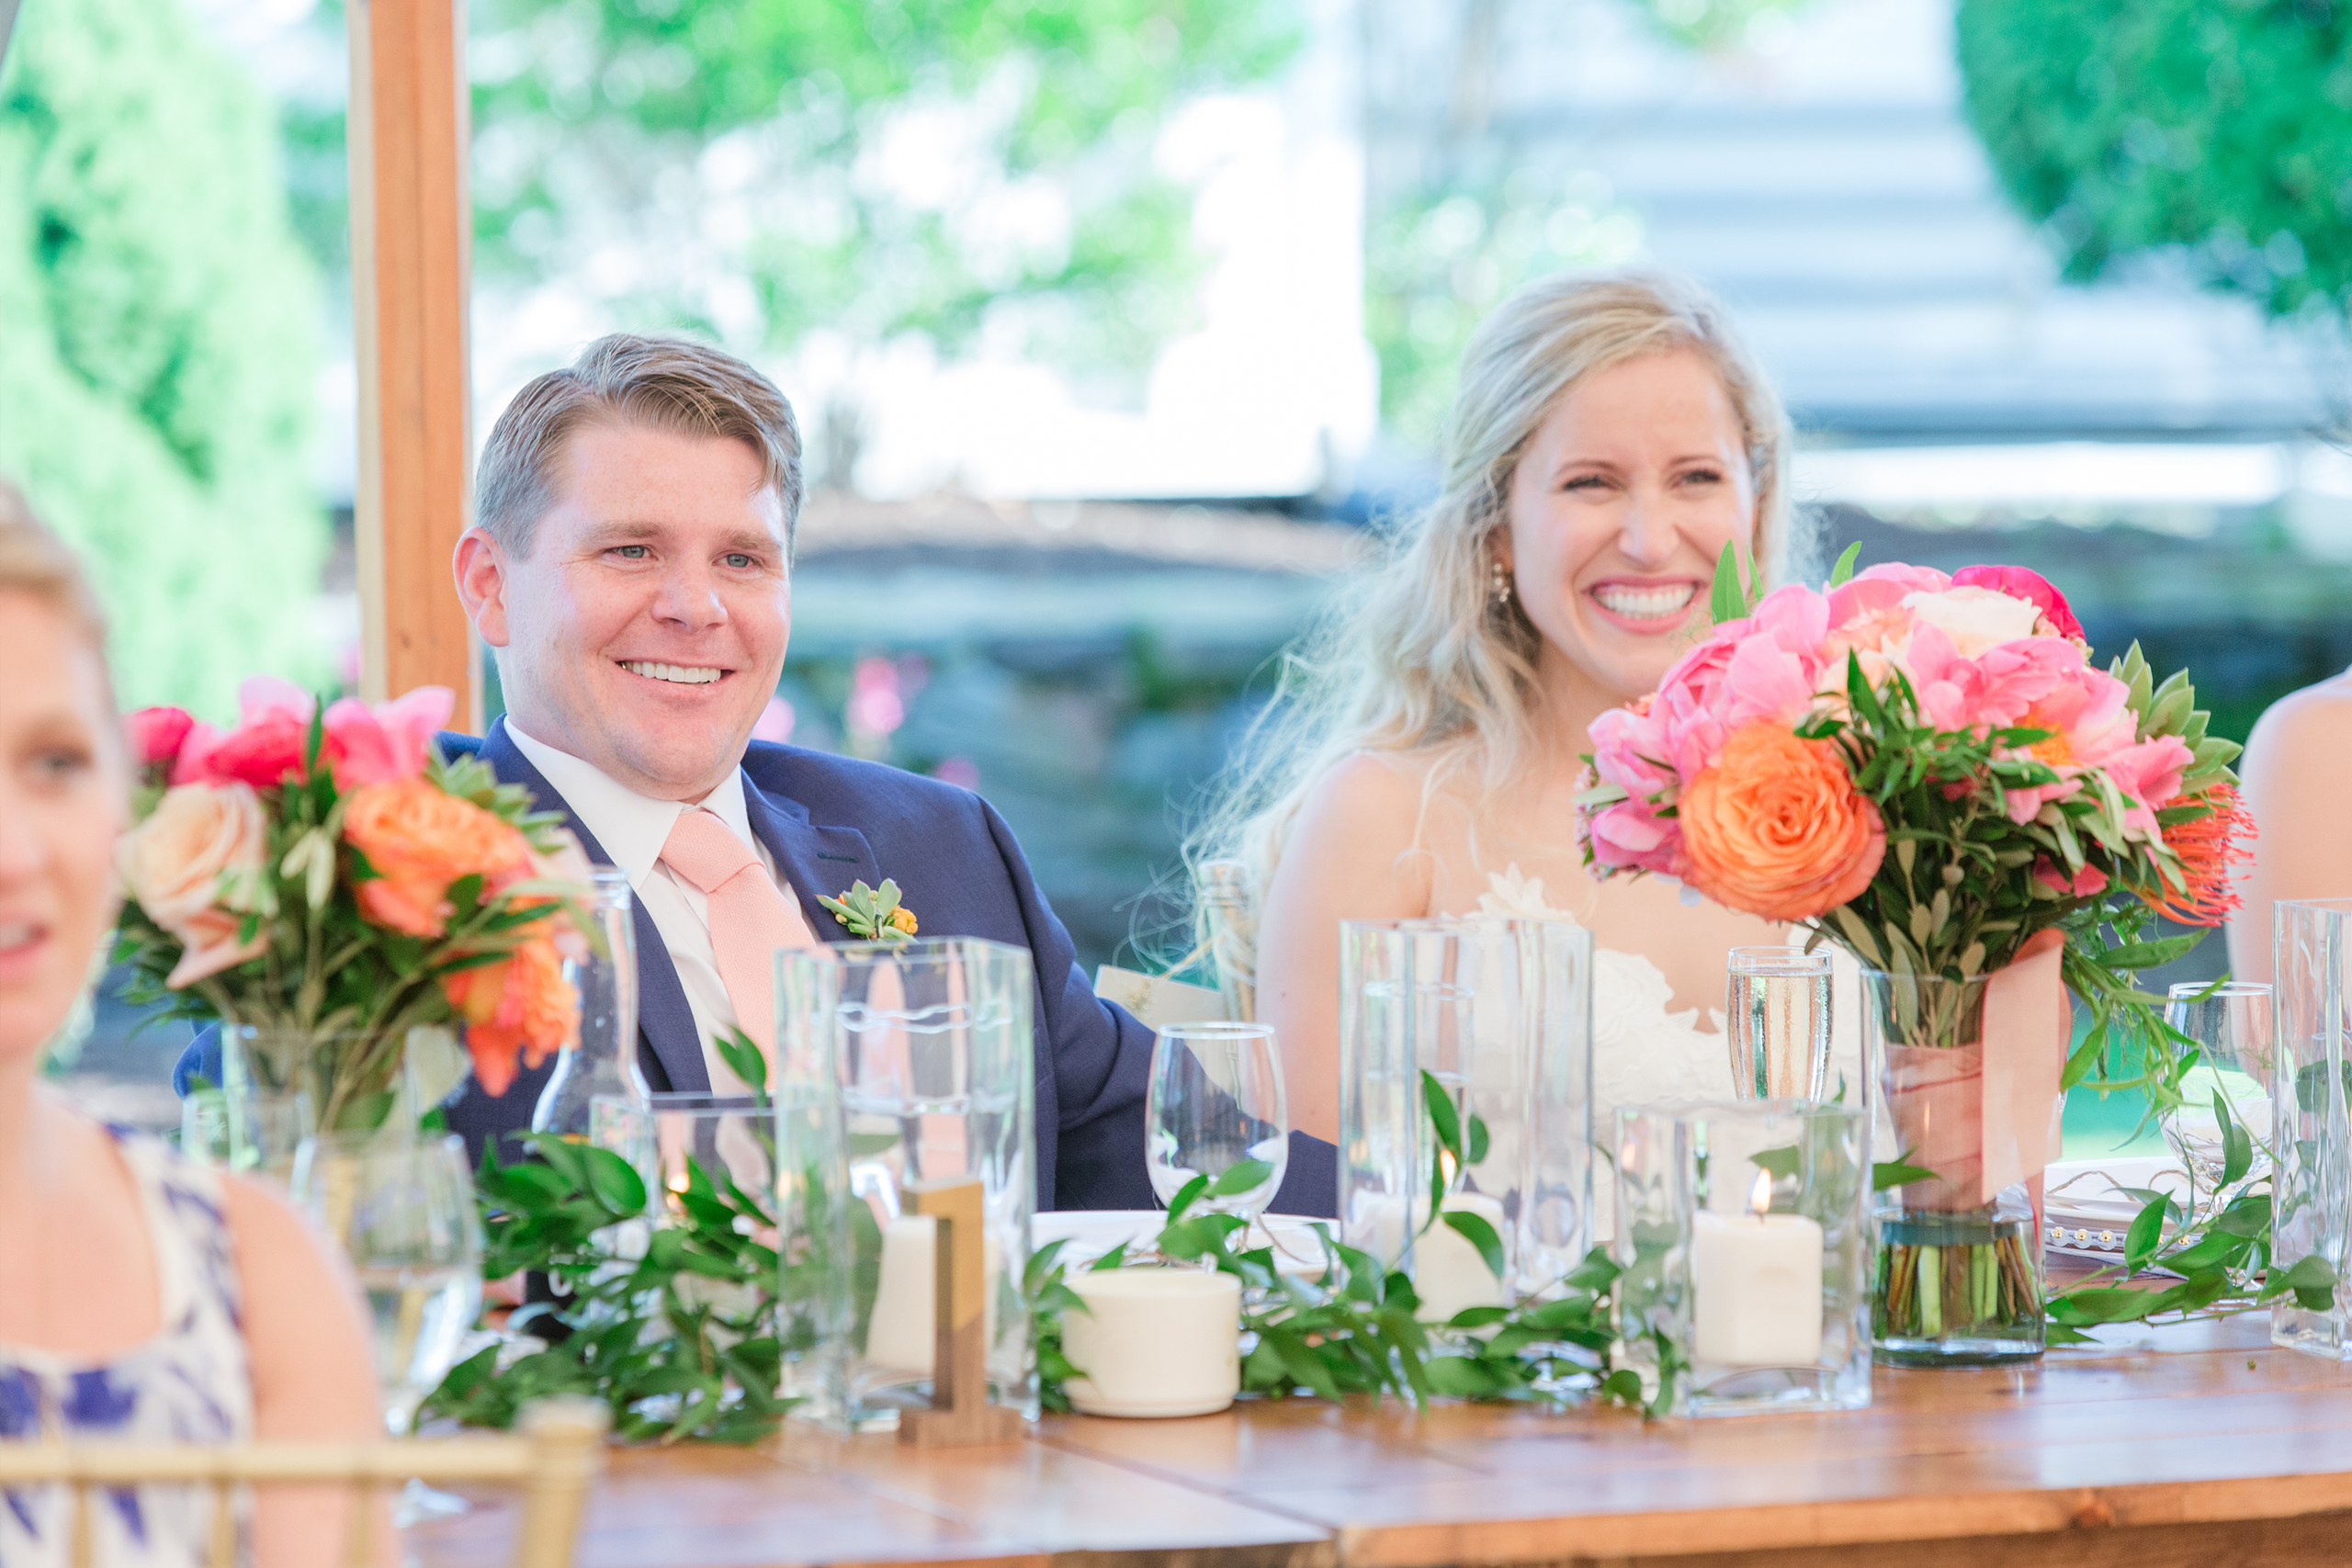 Groom and bride sitting at table